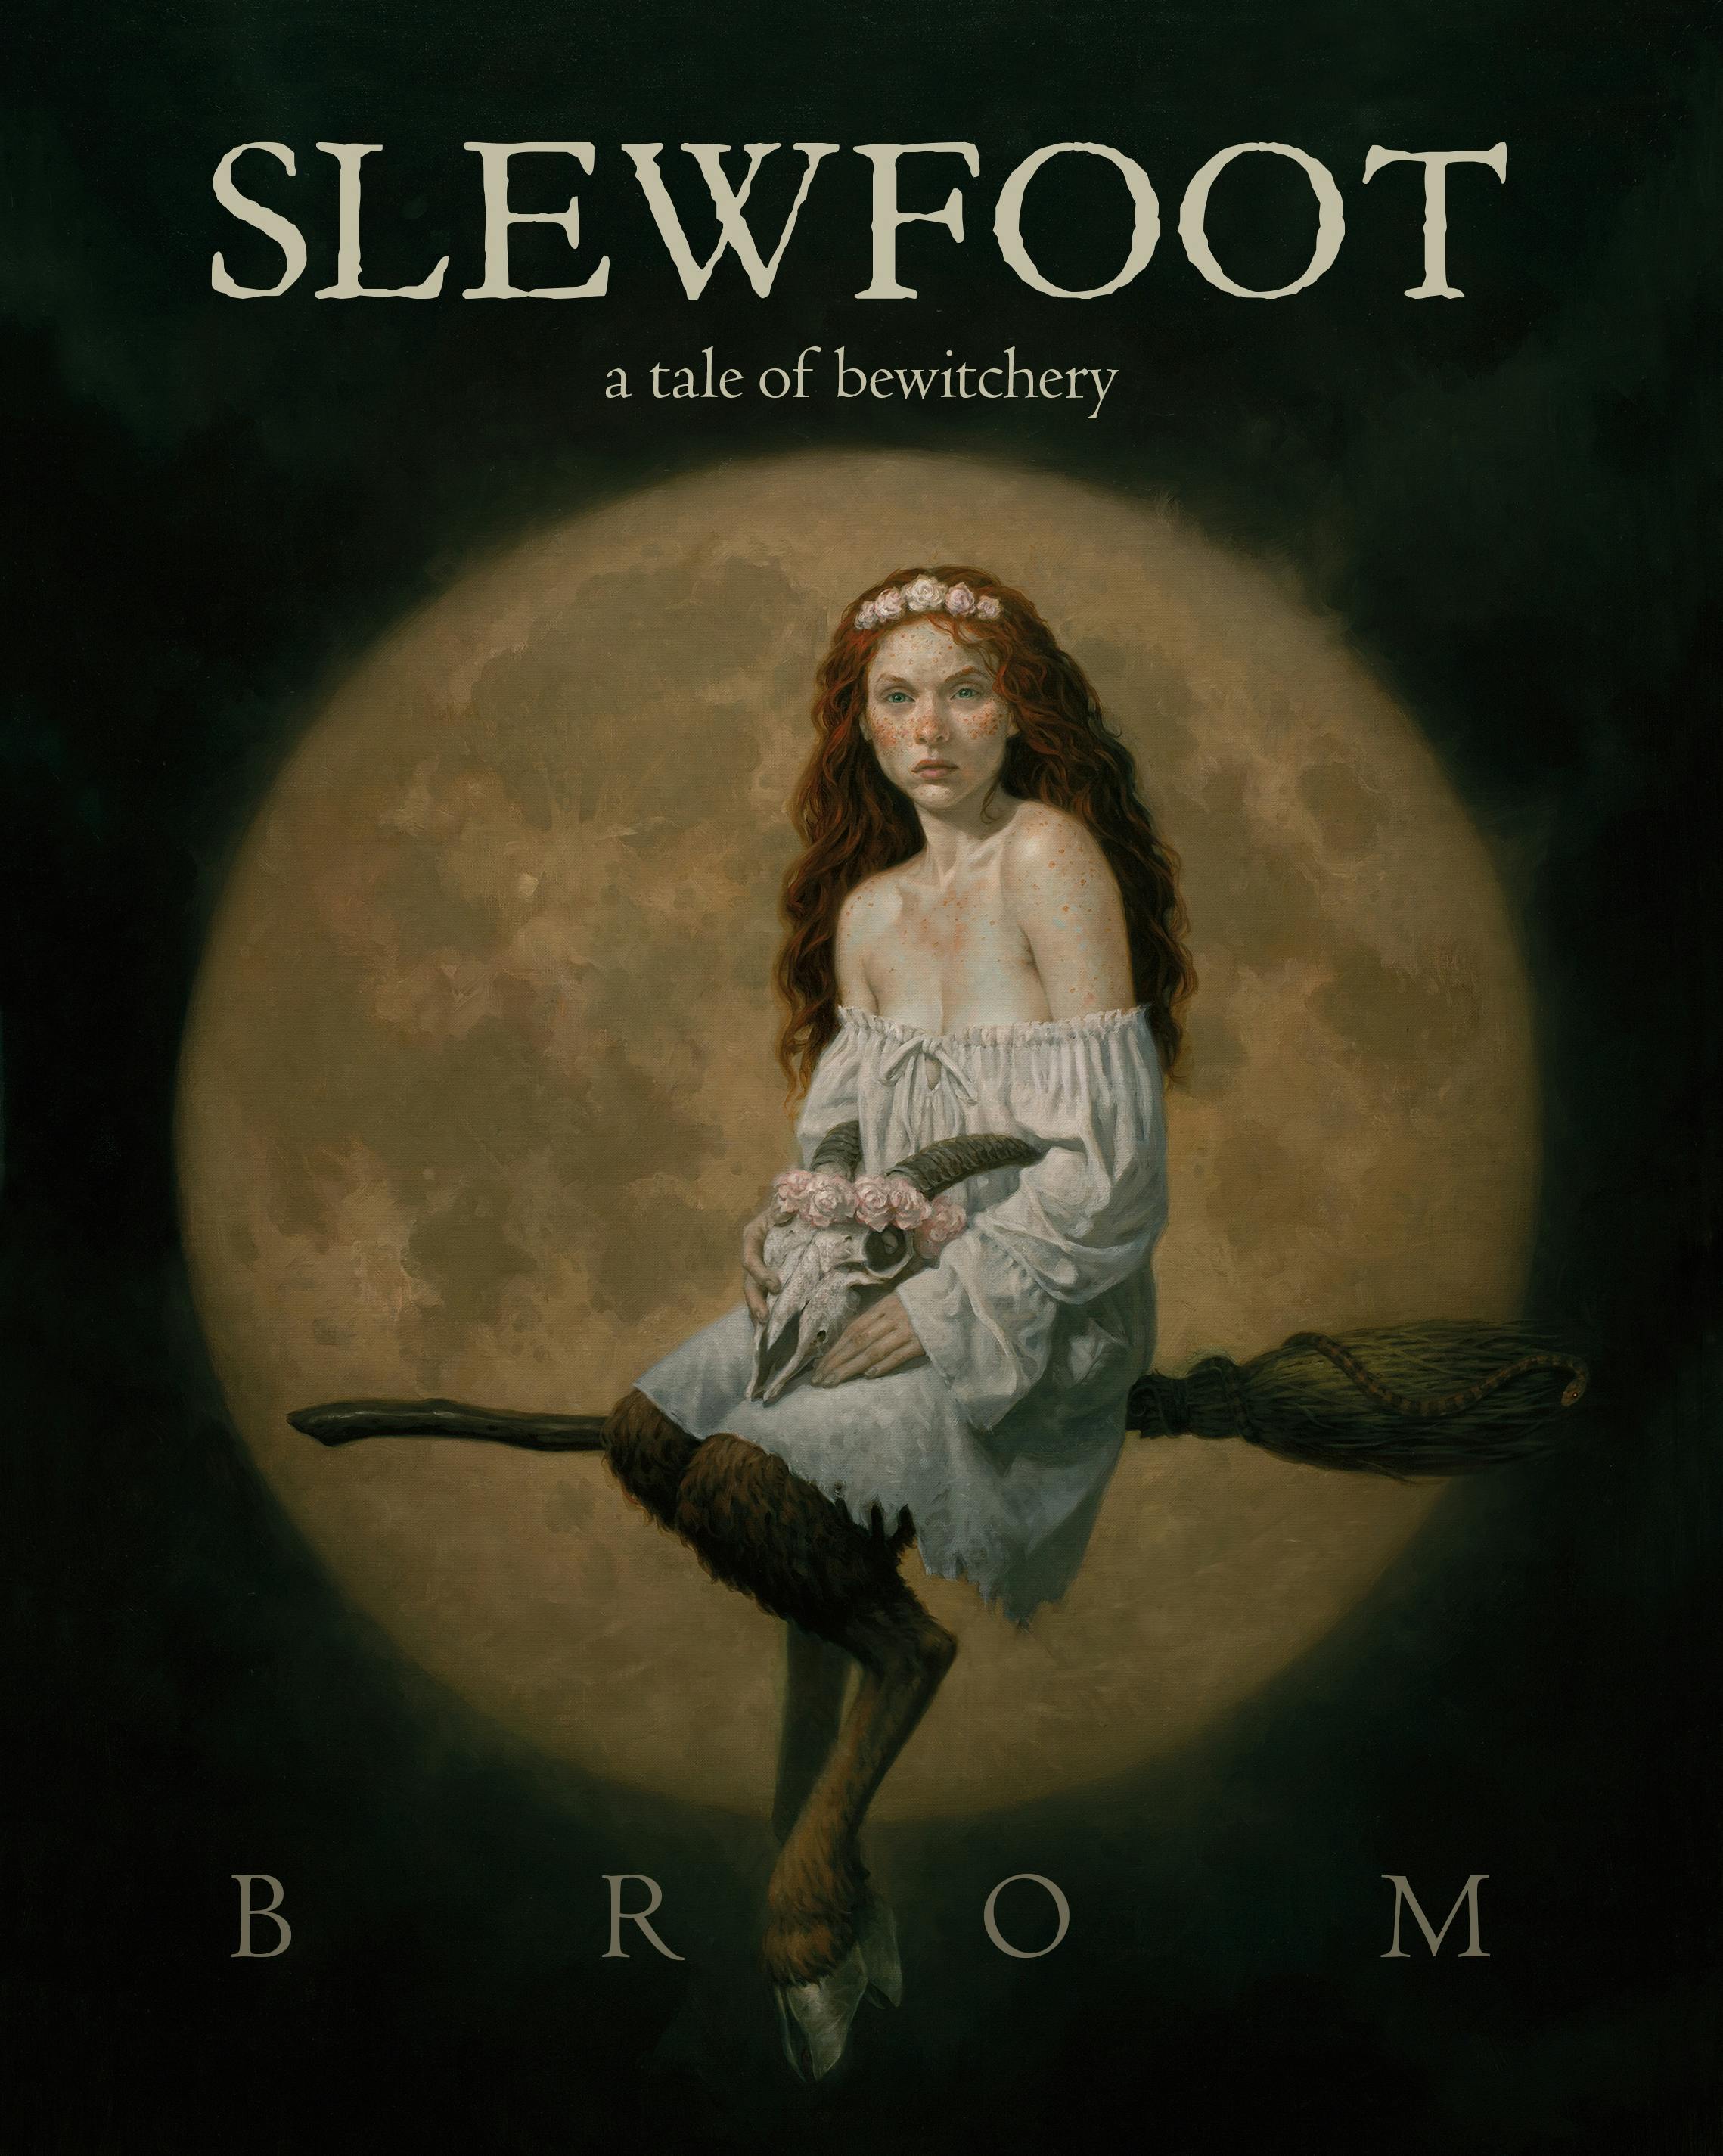 Cover for the book titled as: Slewfoot